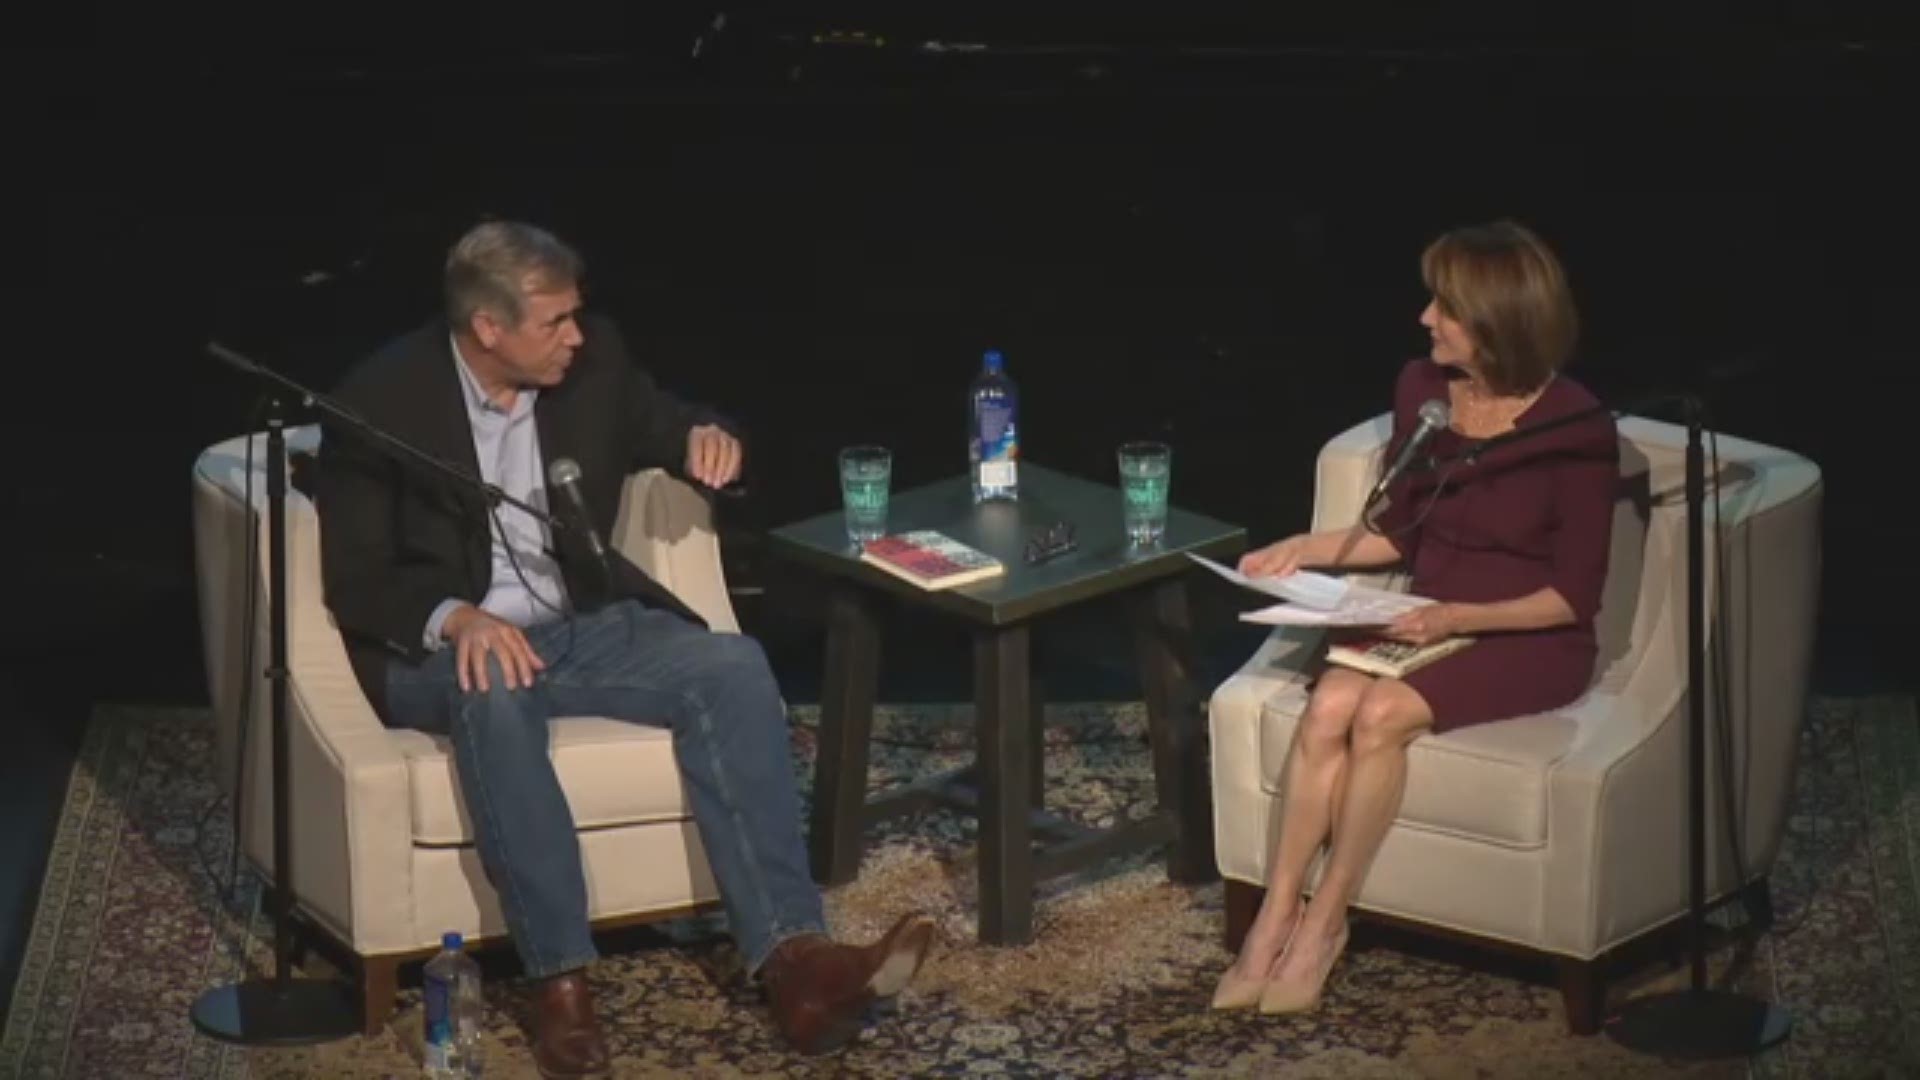 Watch a preview clip of KGW's Laural Porter interviewing Sen. Jeff Merkley at Portland's Revolution Hall. The event was put on by Powell's, and the senator talked about his newly-released book, "America is Better Than This."